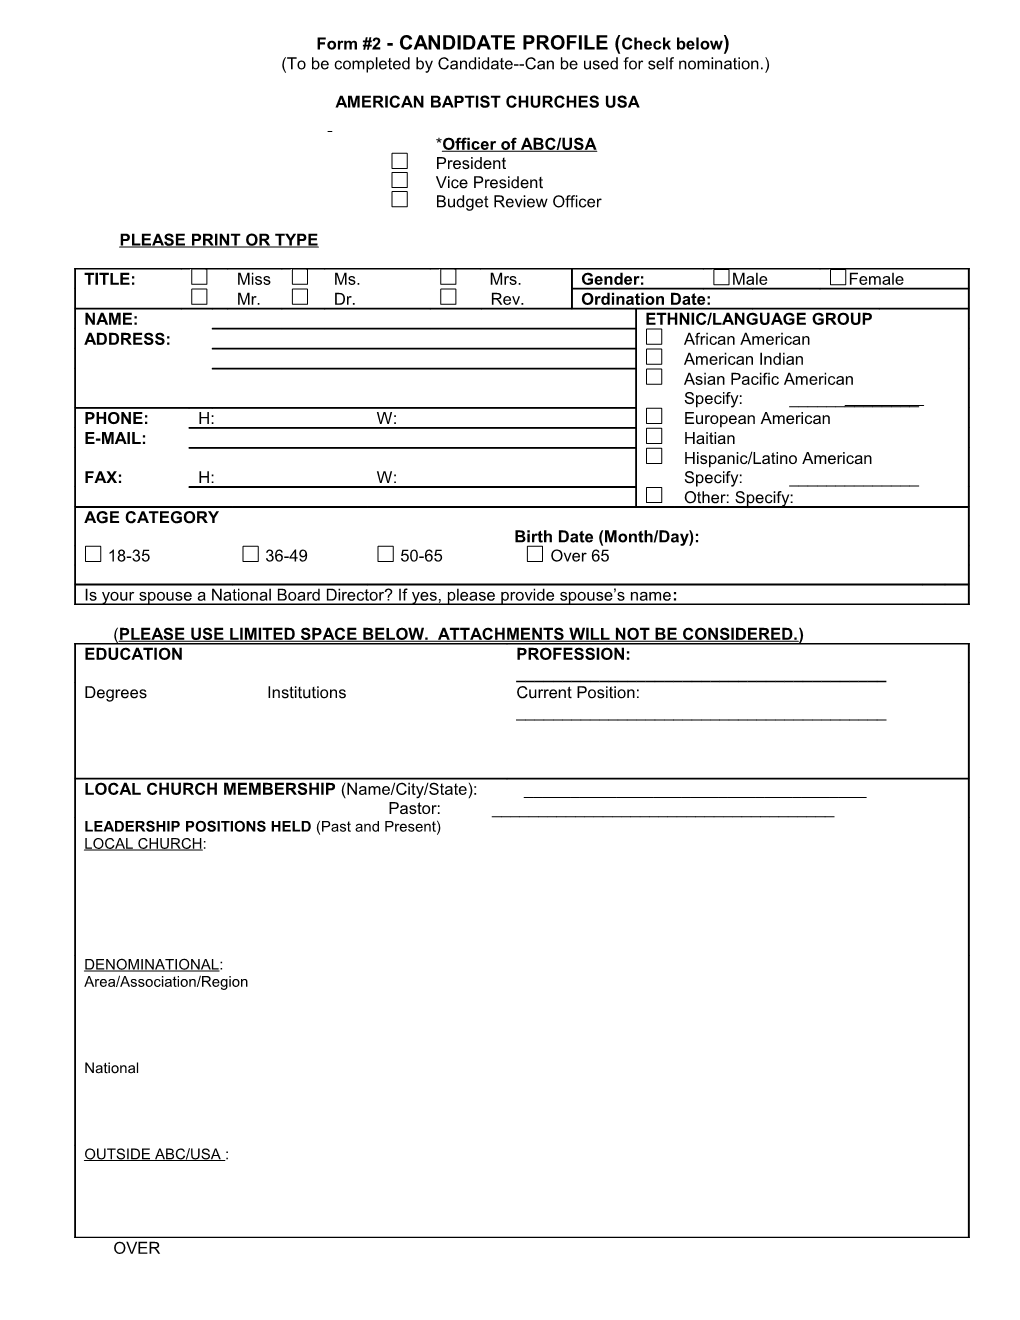 Form #1 - PROFILE to BE COMPLETED by CANDIDATE (Check Below*)